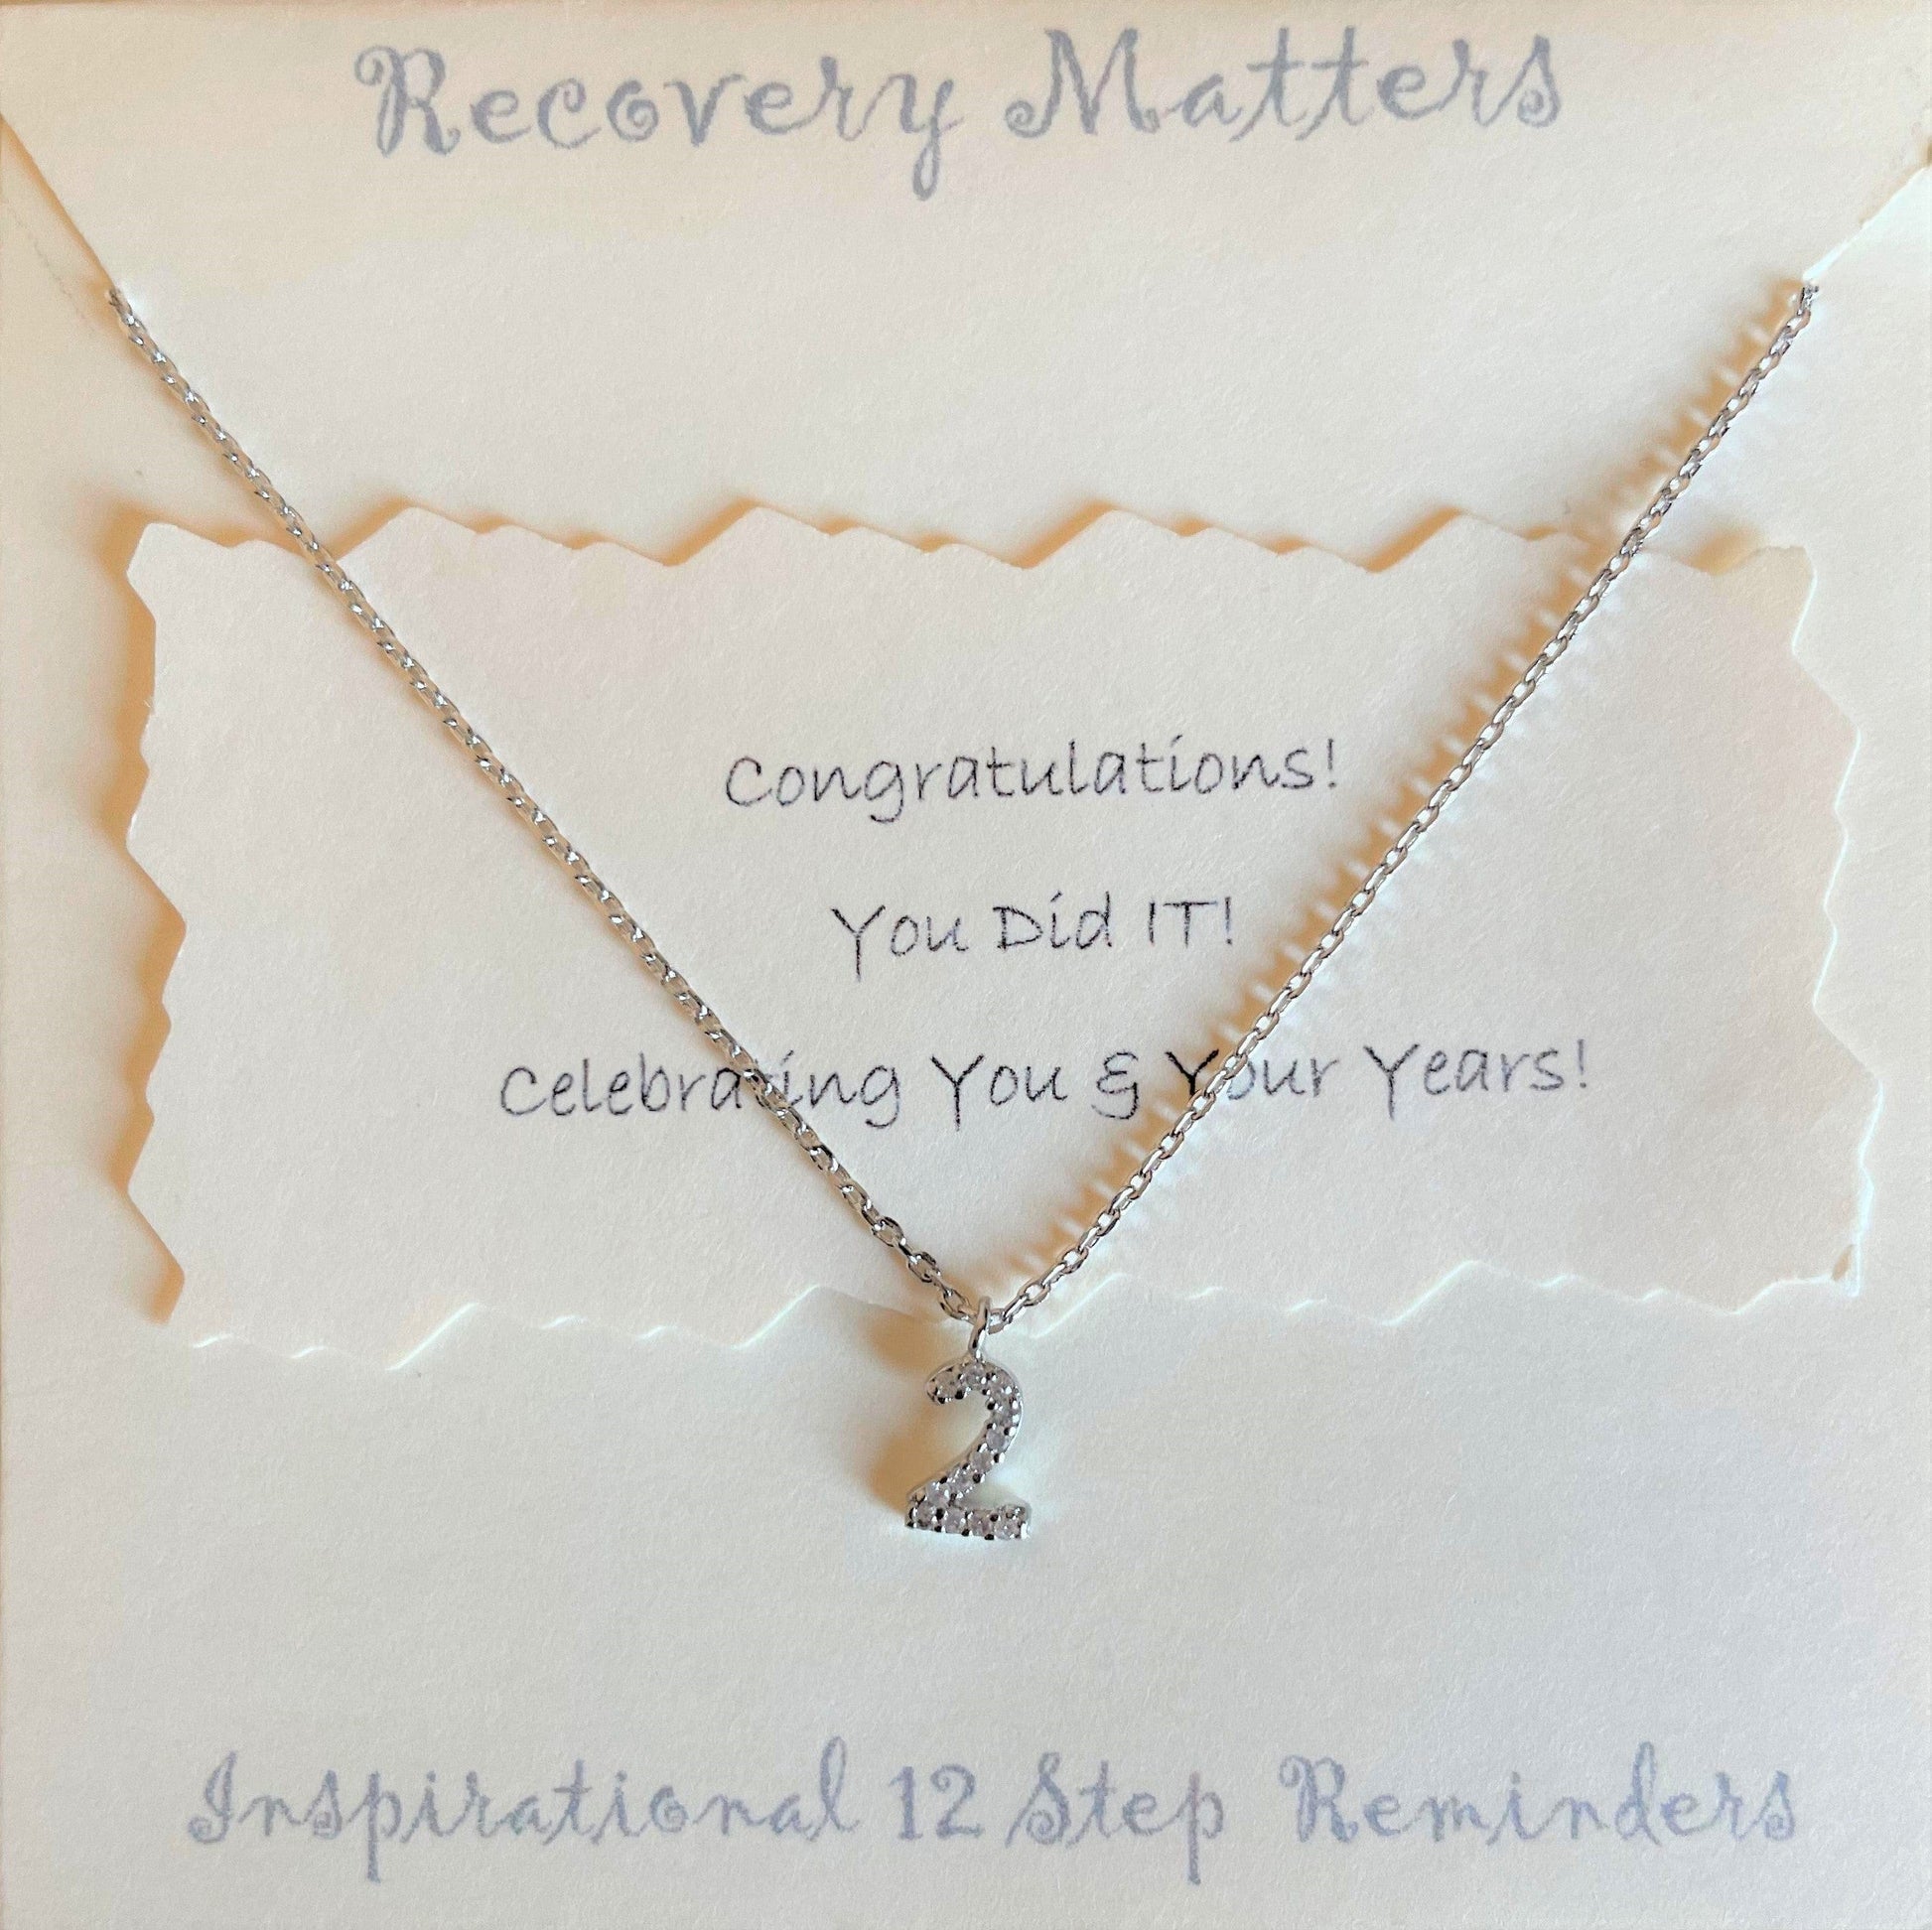 Milestone Necklace By Recovery Matters